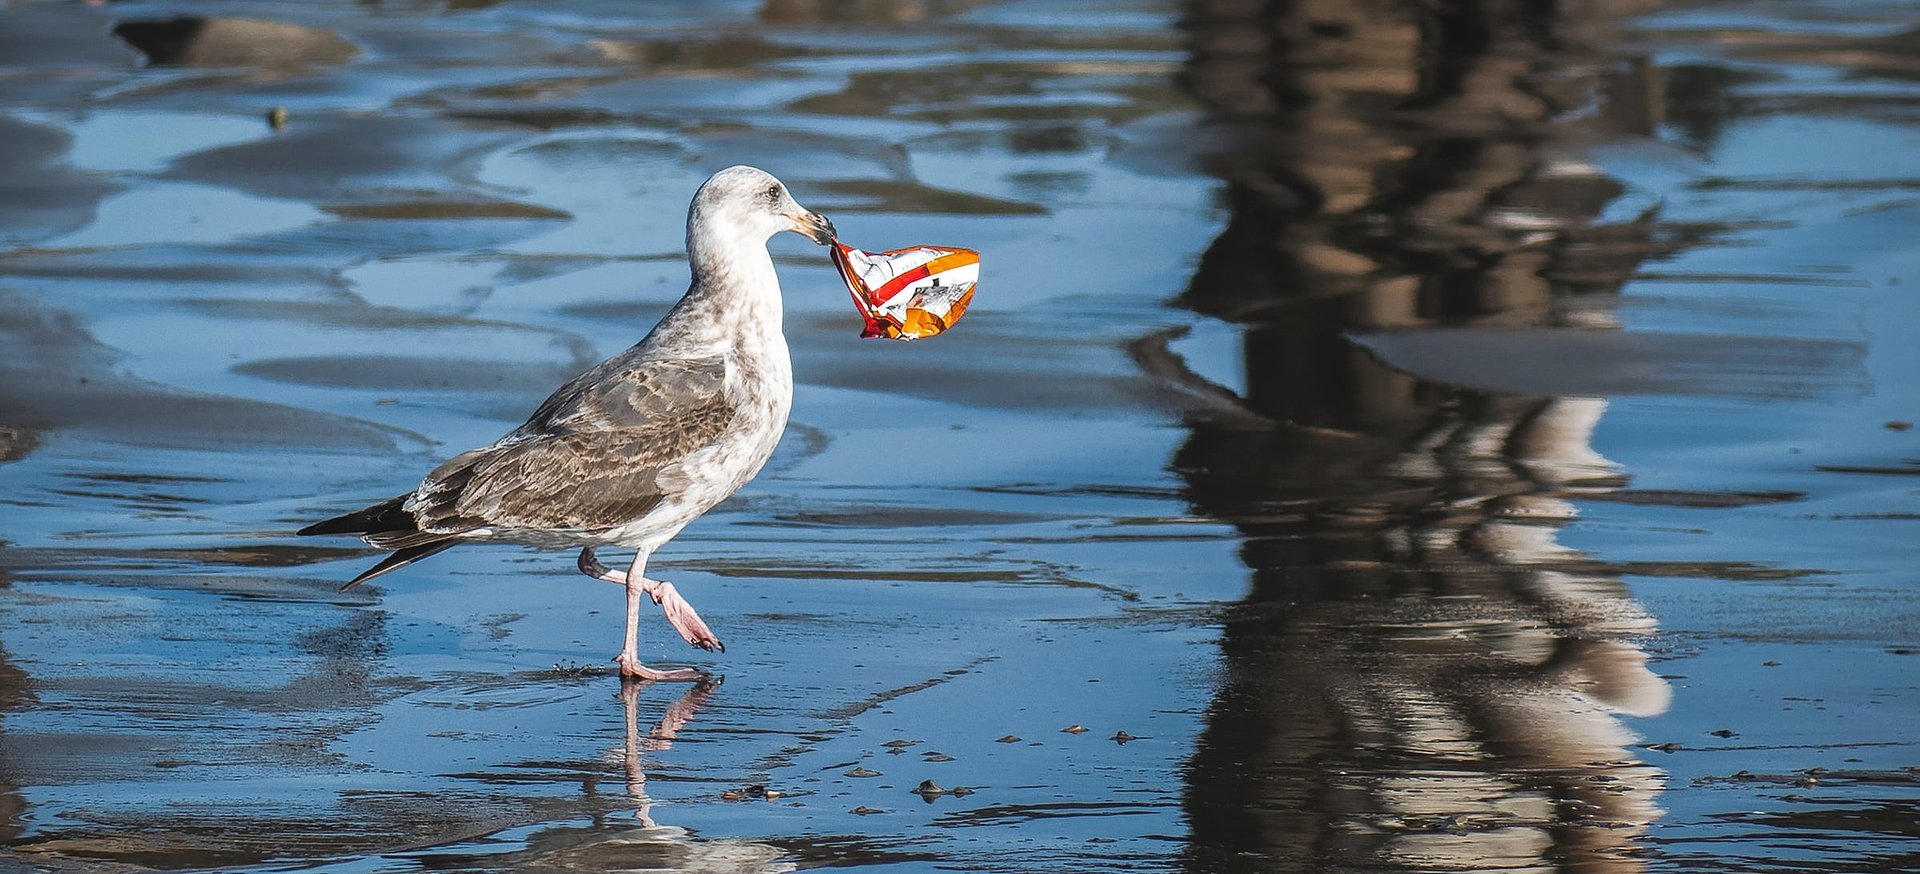 Seagull with can in it's beak